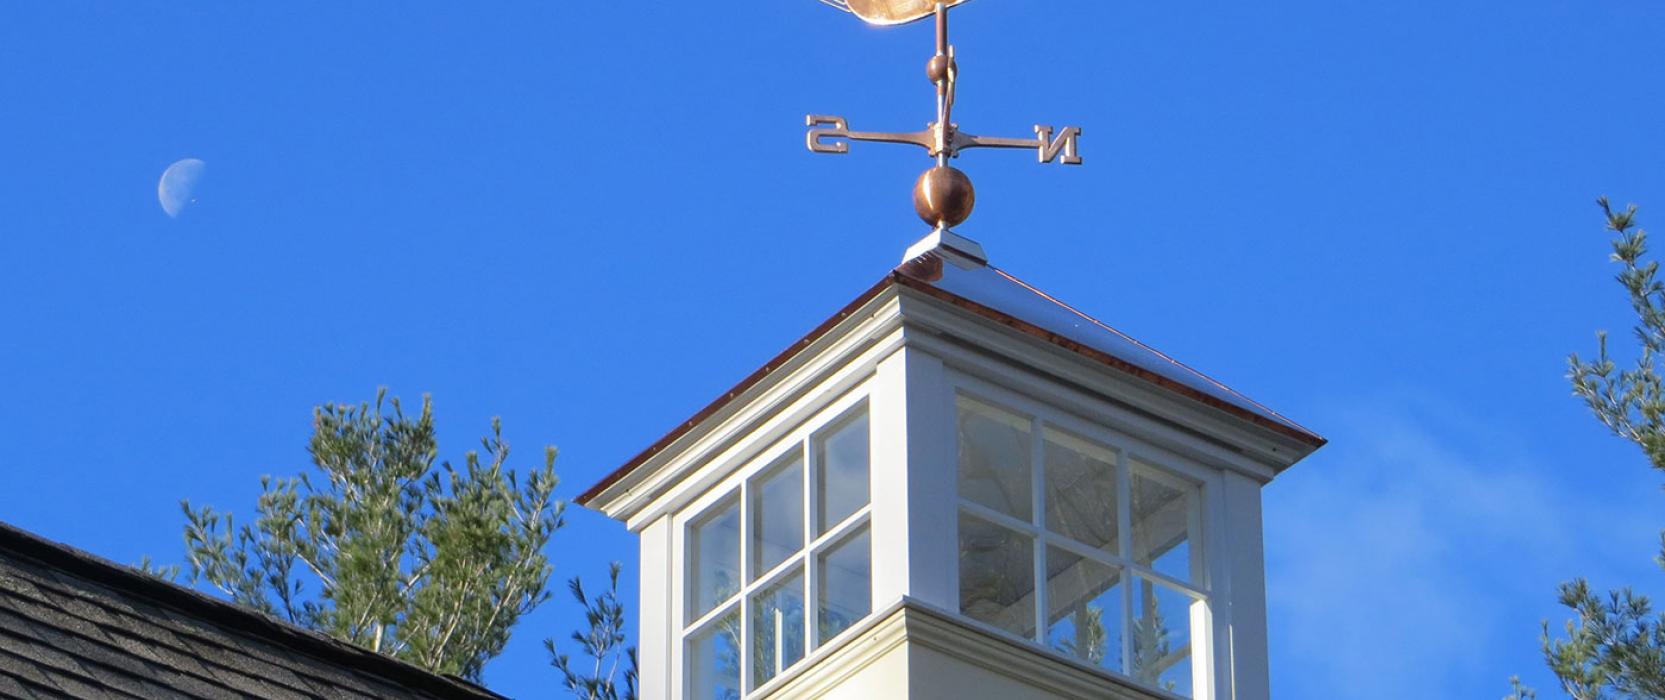 Handcrafted cupolas and weather vanes by Cape Cod Cupola